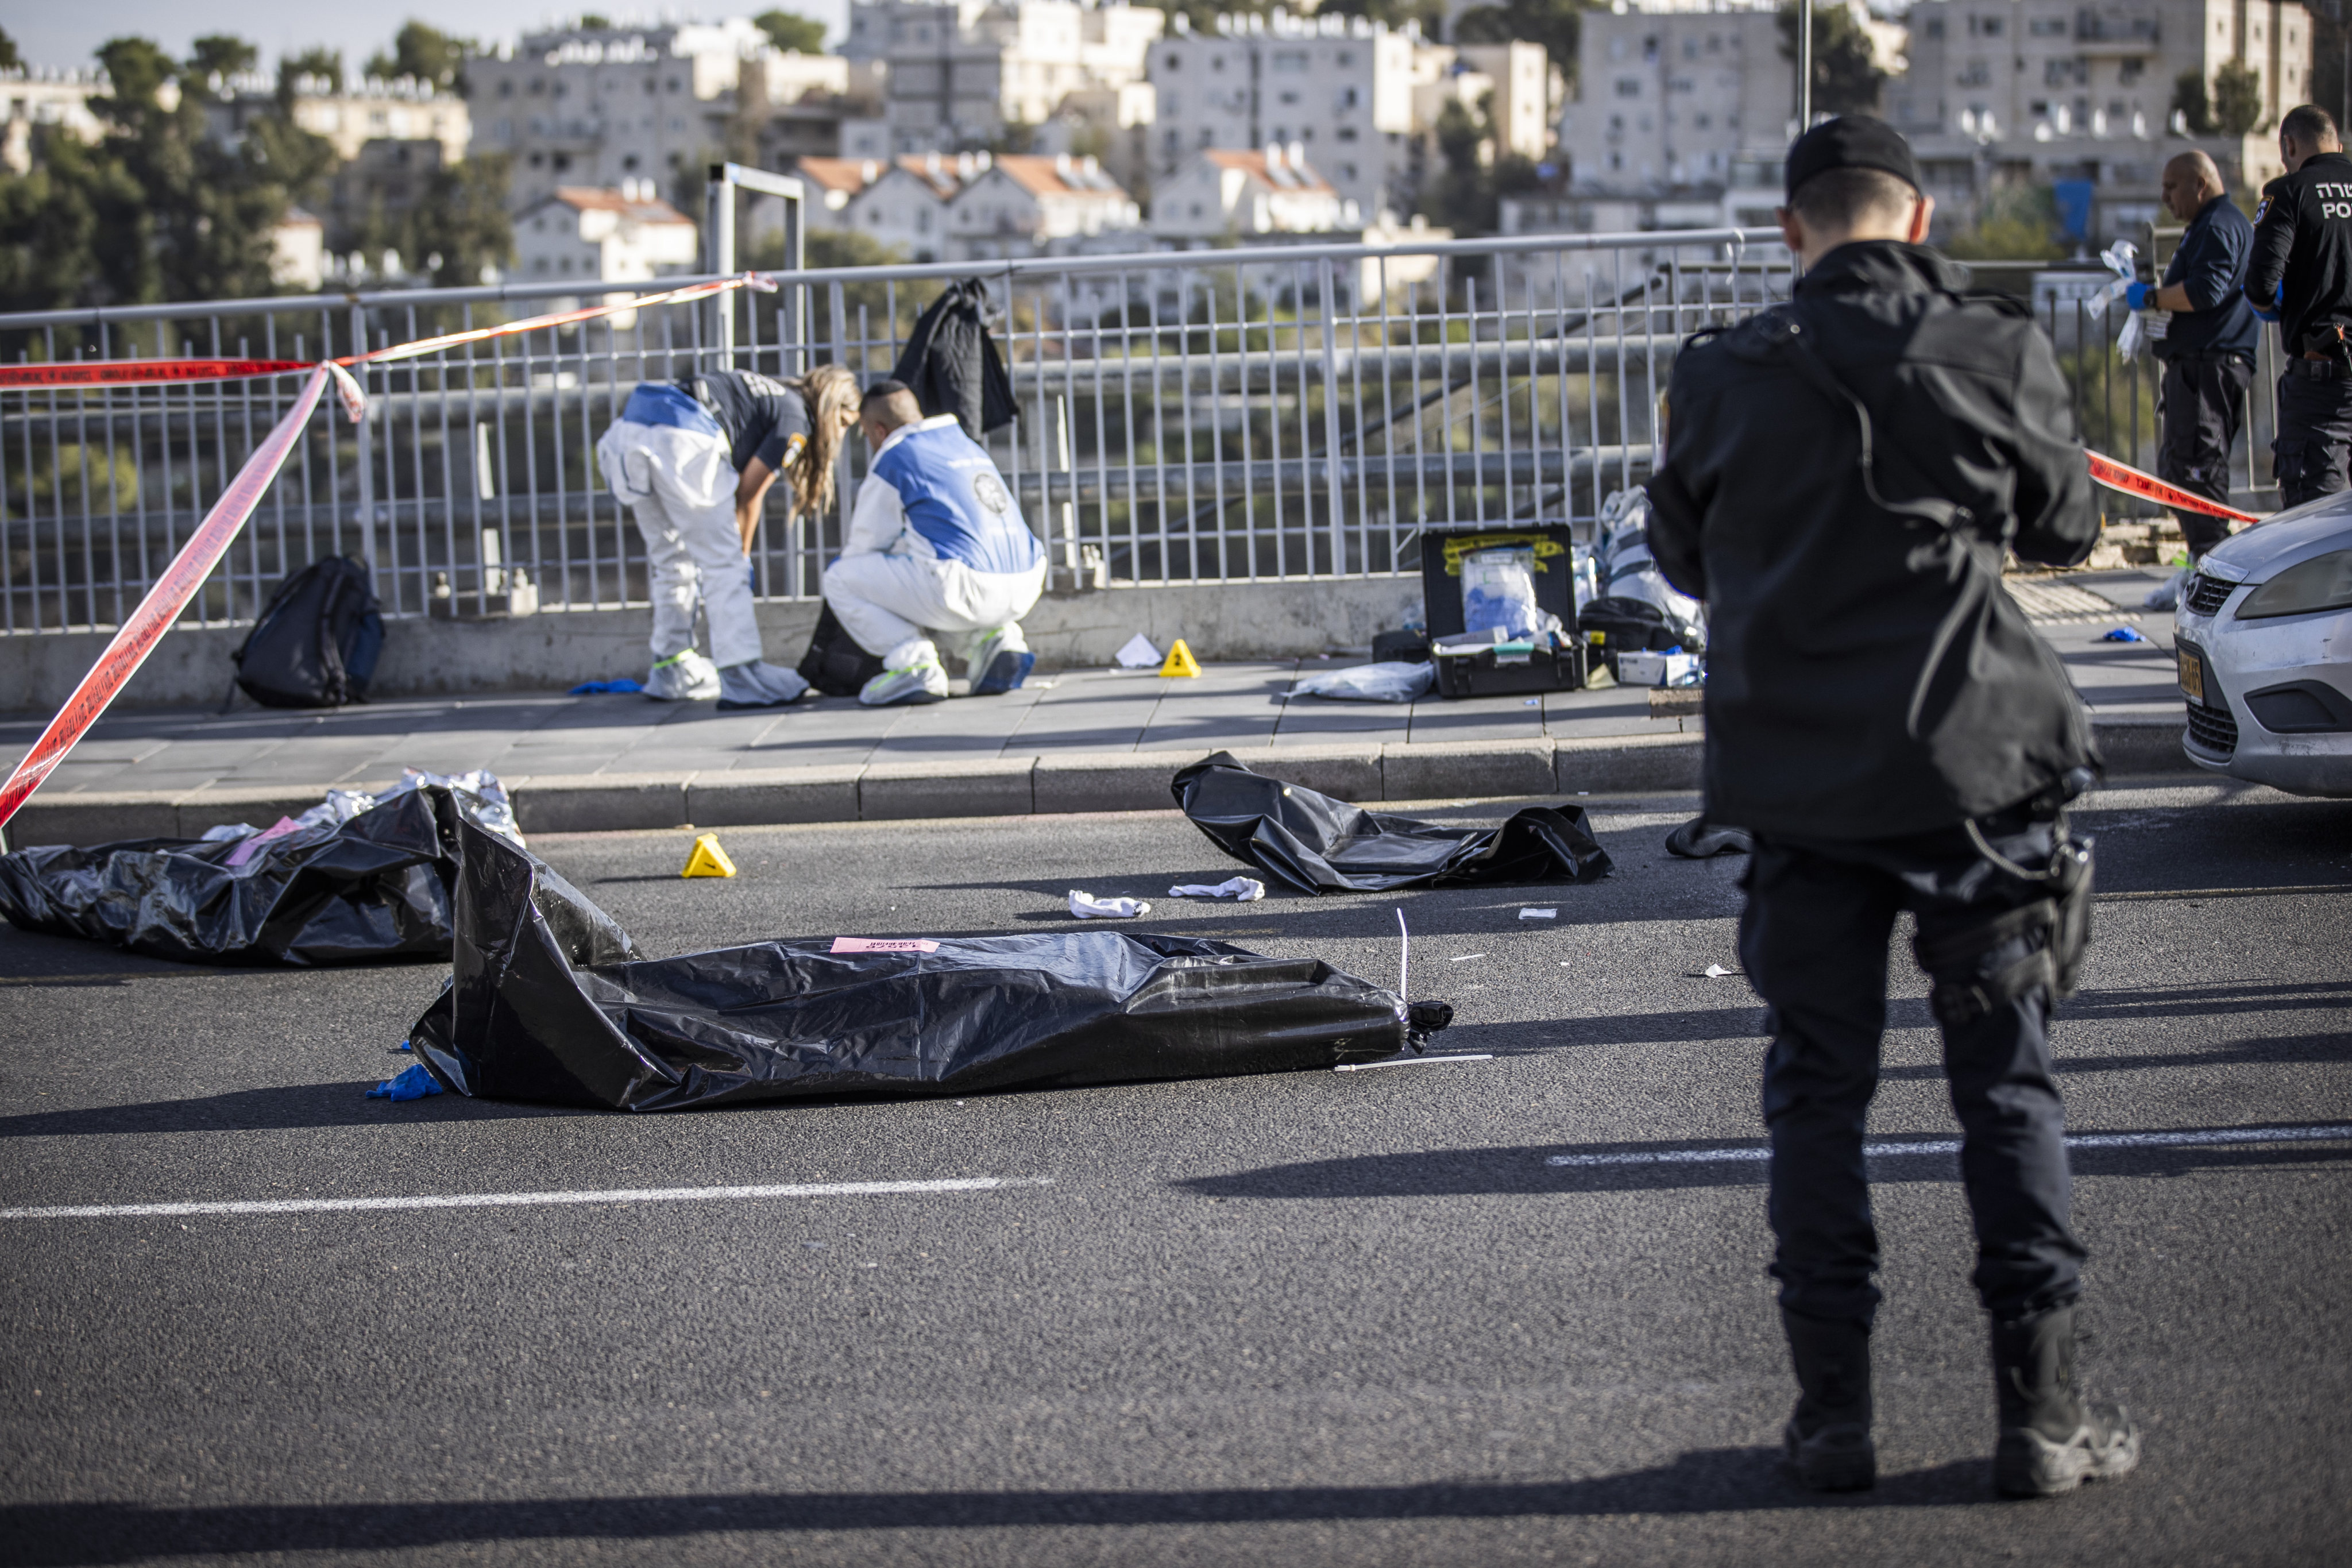 Officials work at the scene of a shooting attack involving two Palestinian attackers who opened fire on people waiting at a bus stop in Jerusalem, killing three people and injuring at least 16 others. Photo: dpa